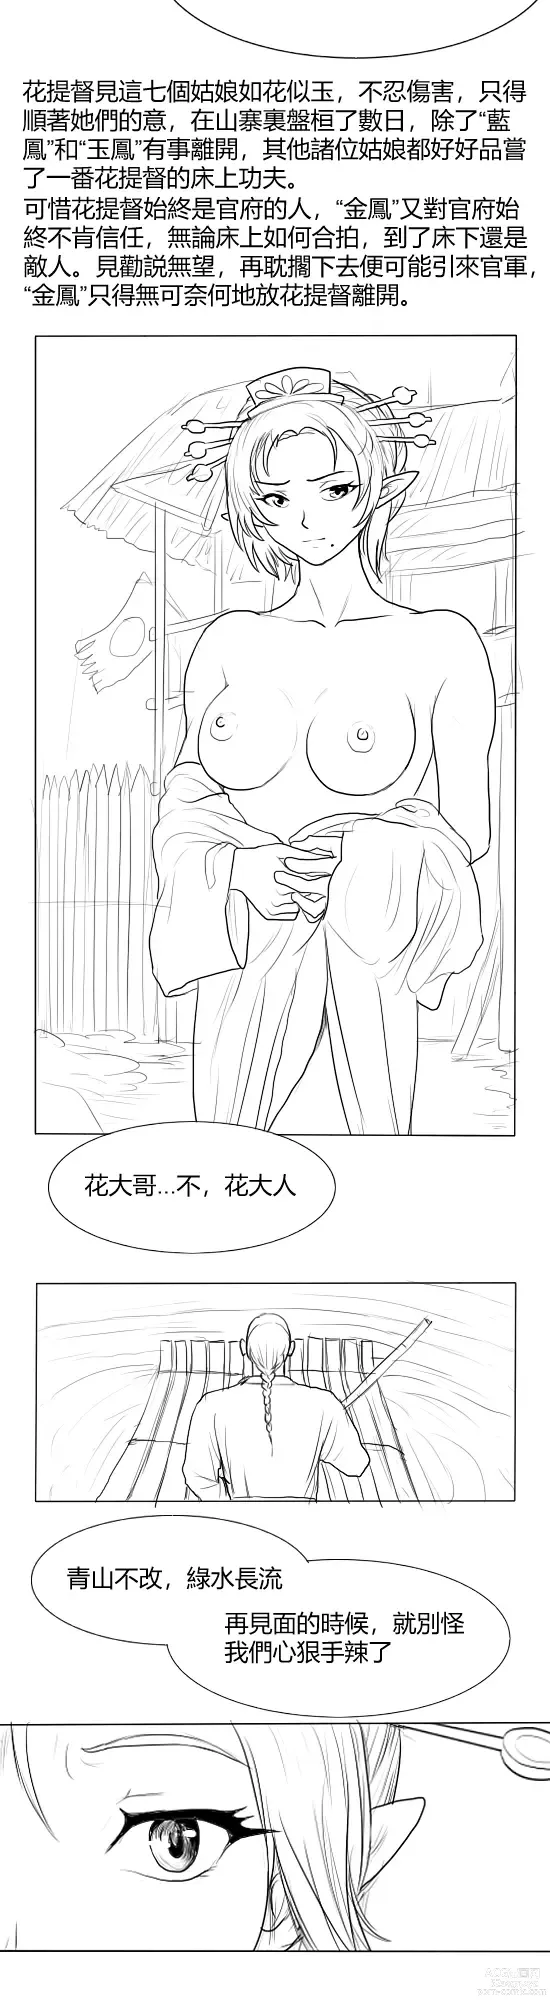 Page 19 of doujinshi 落英  第一话